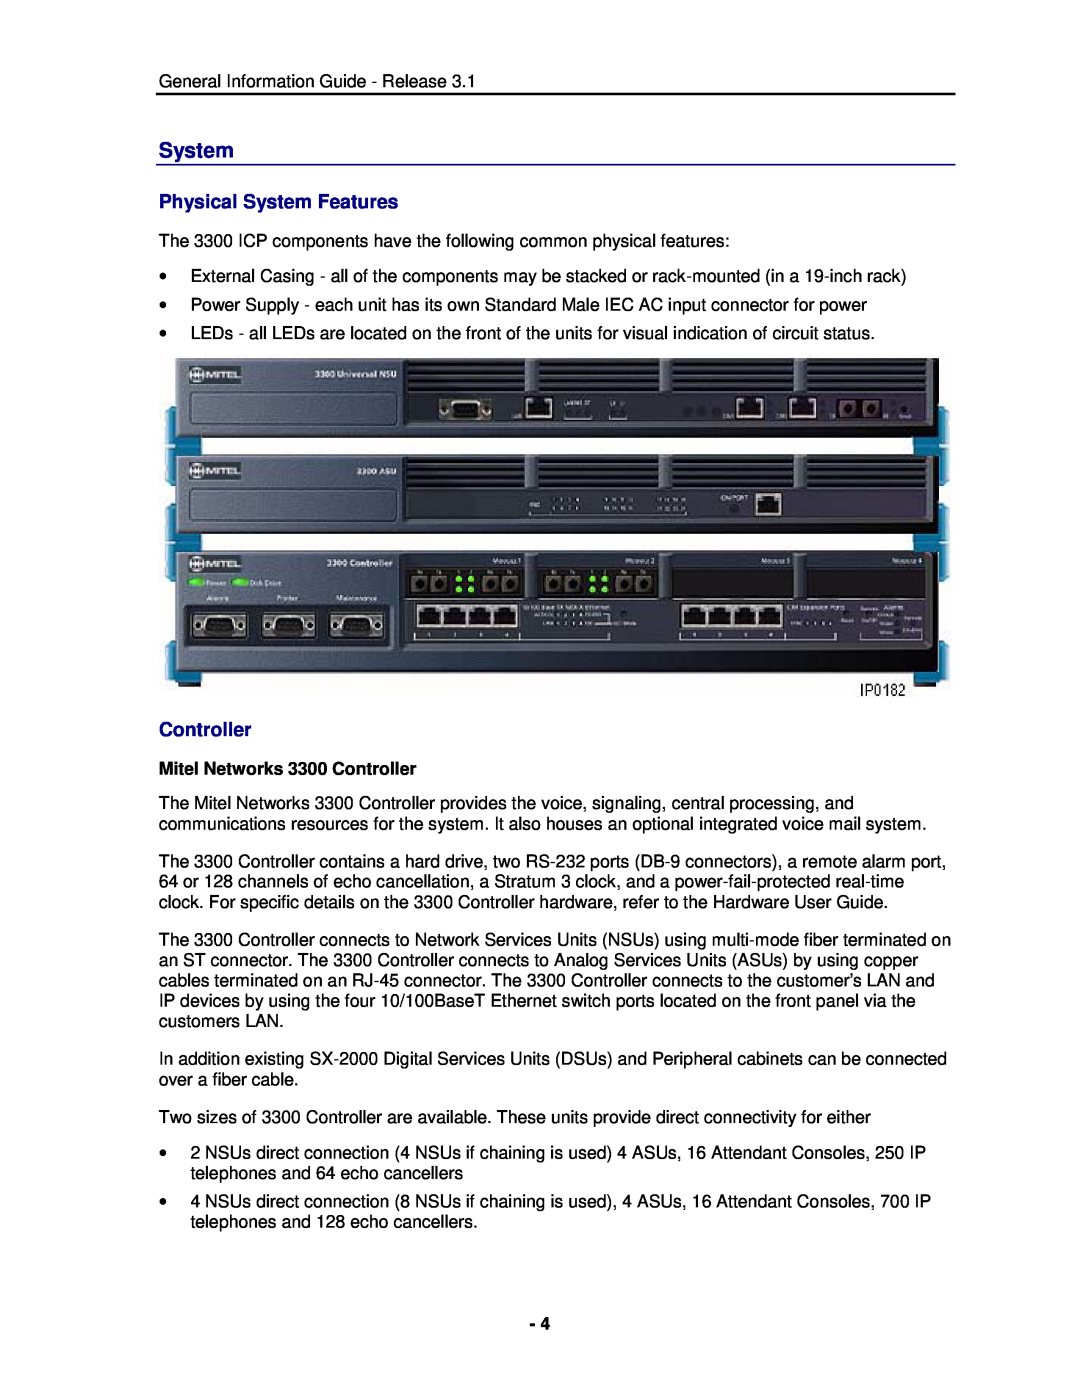 Mitel manual Physical System Features, Mitel Networks 3300 Controller 